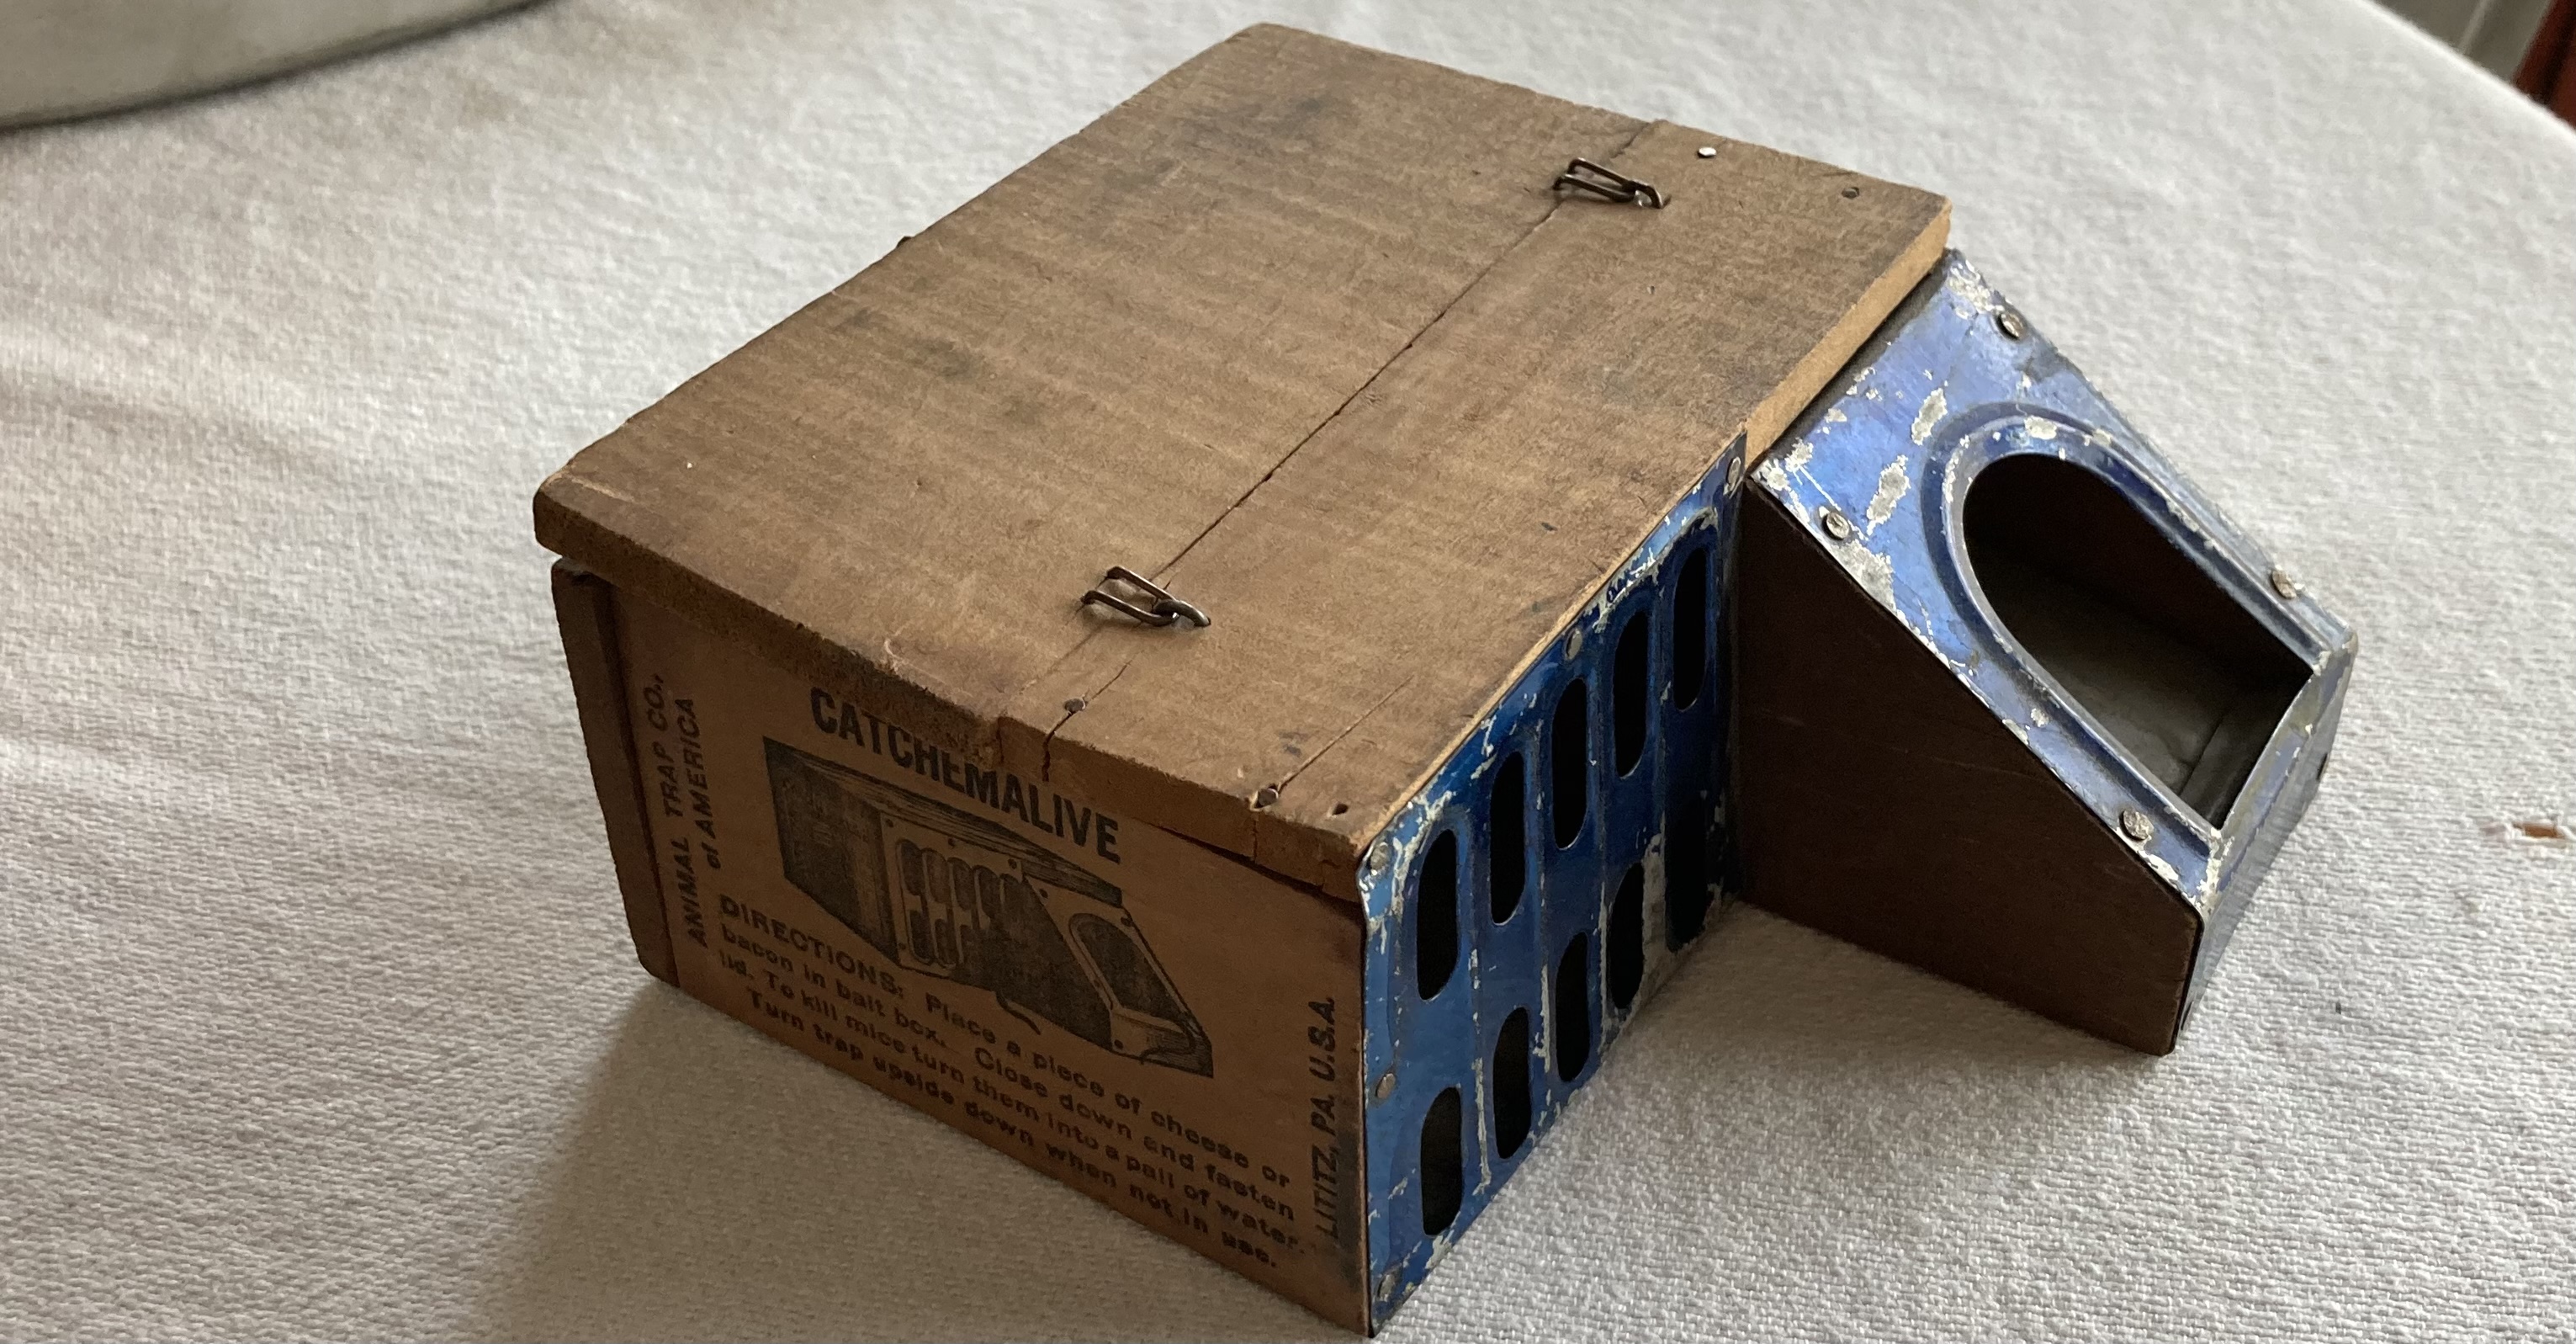 Hunting Down Rat and Mice Trap Collectibles - Pest Control Technology